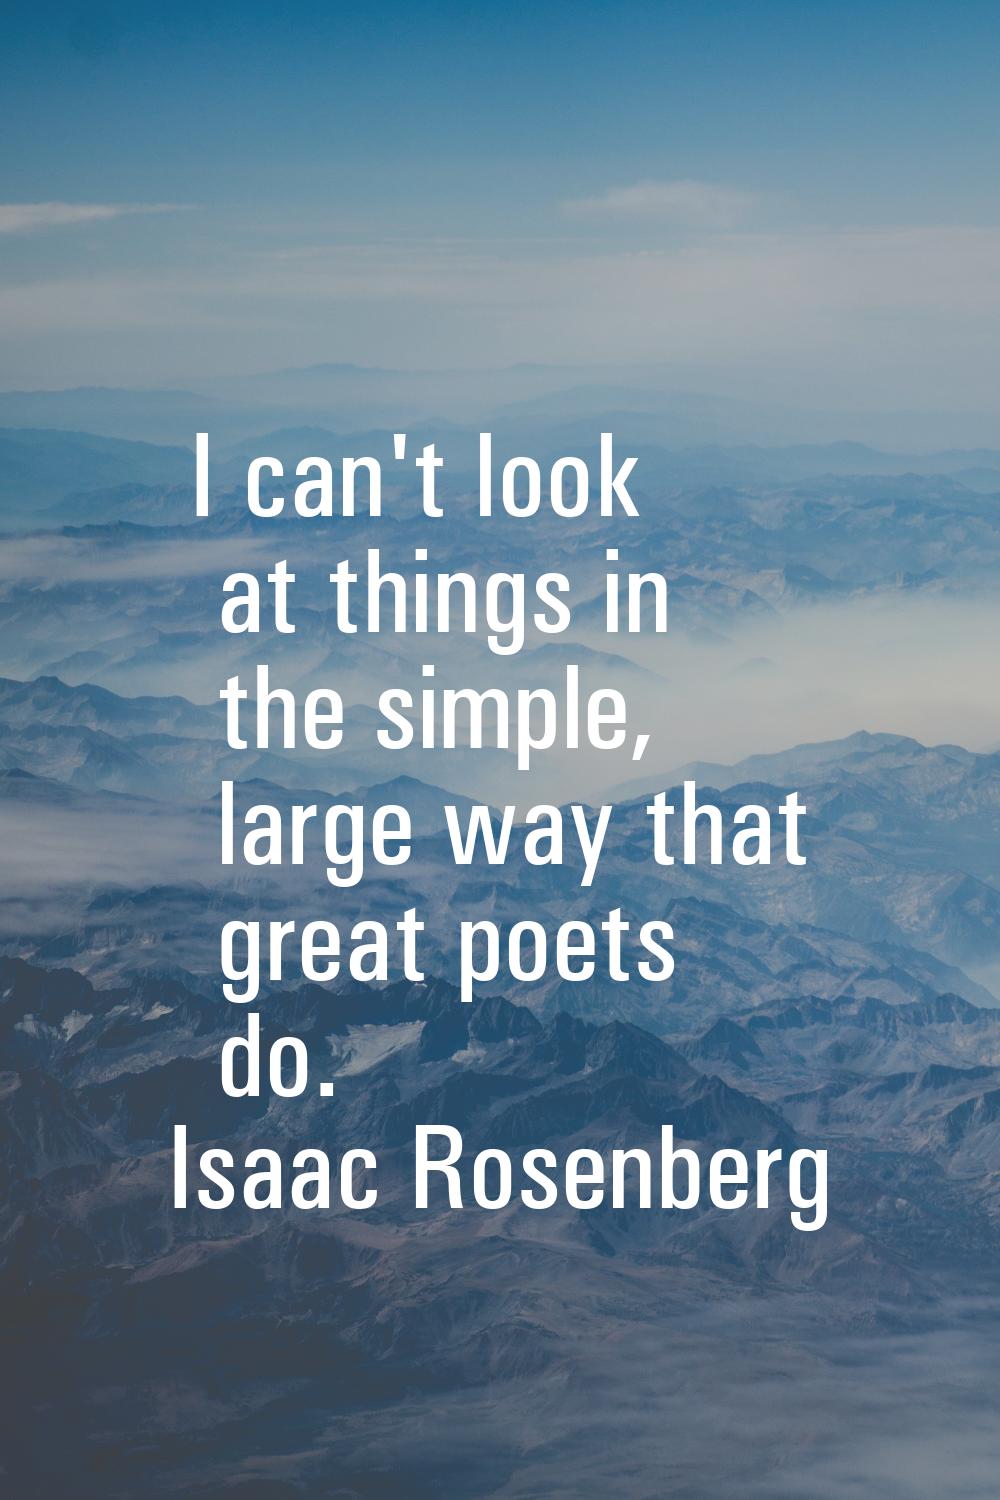 I can't look at things in the simple, large way that great poets do.